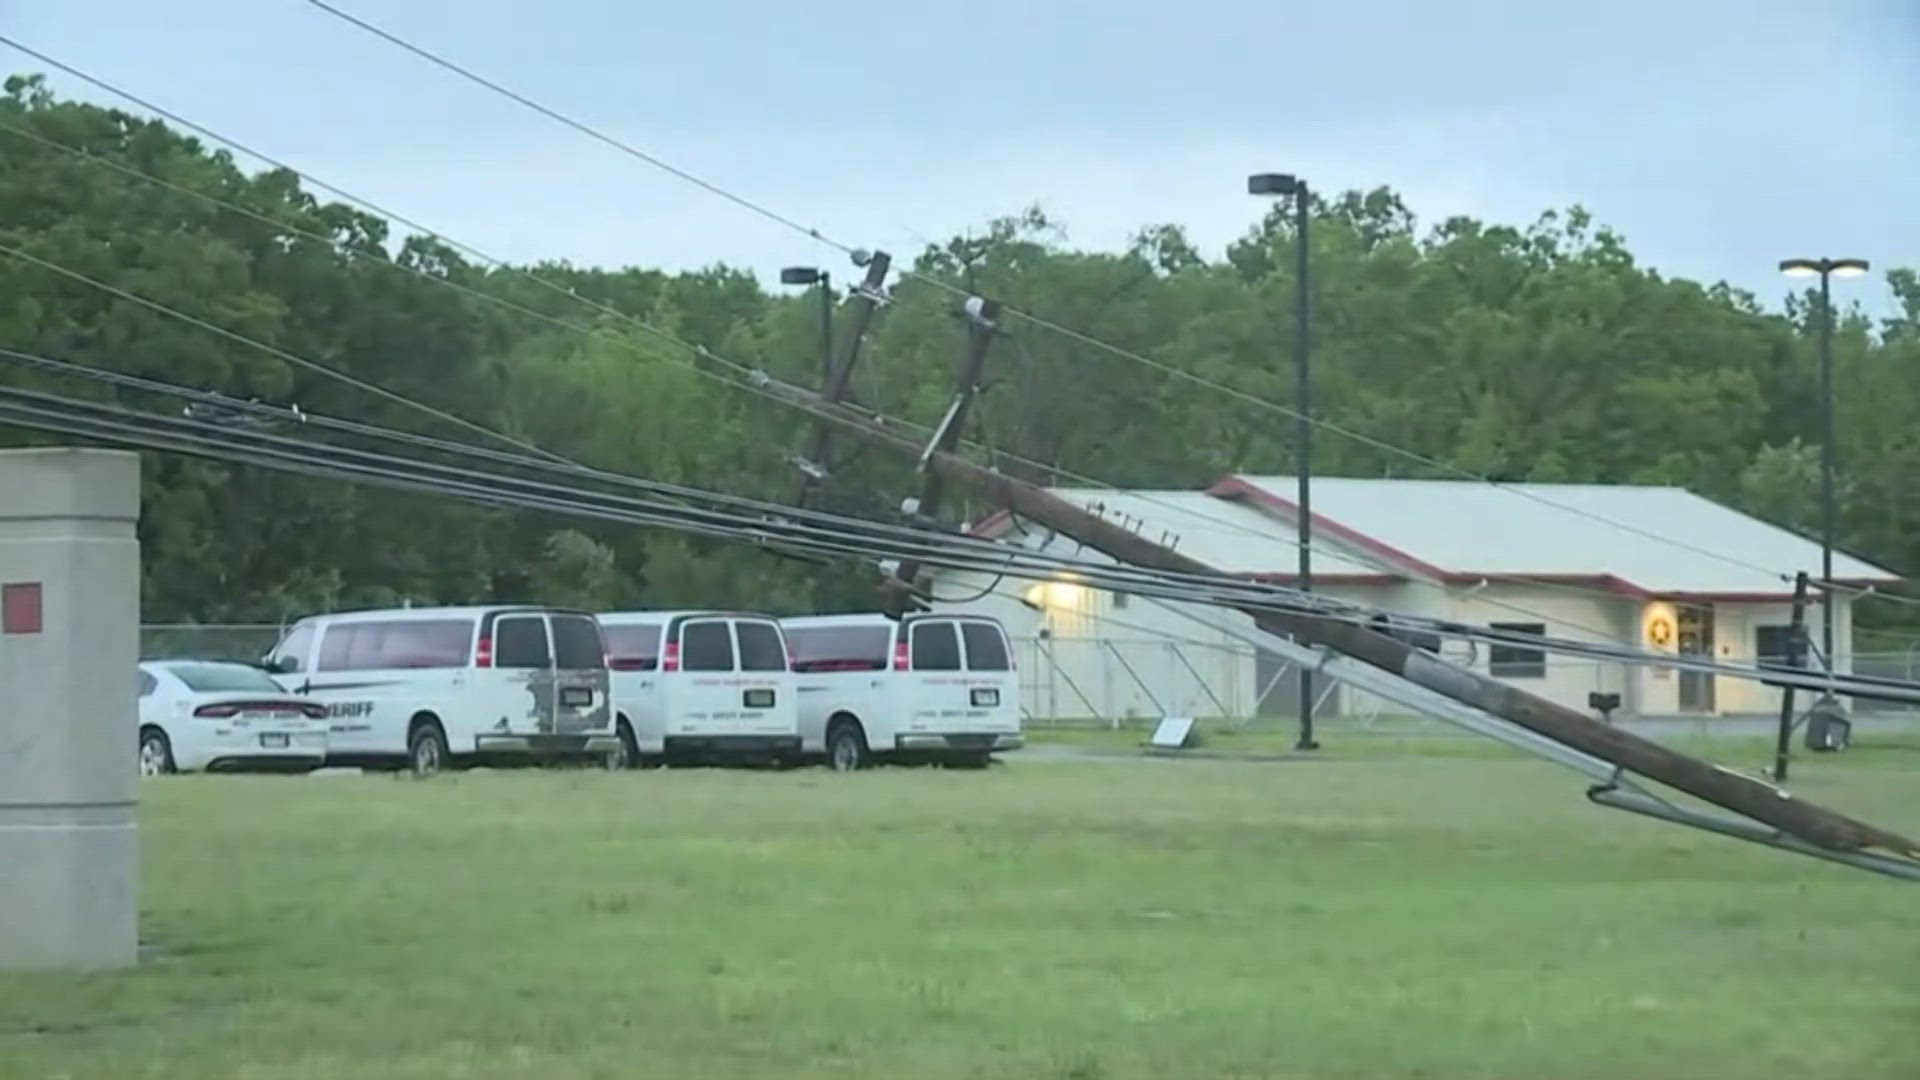 Monday's severe weather left Crawford County with downed power lines. Check out that footage in the video.